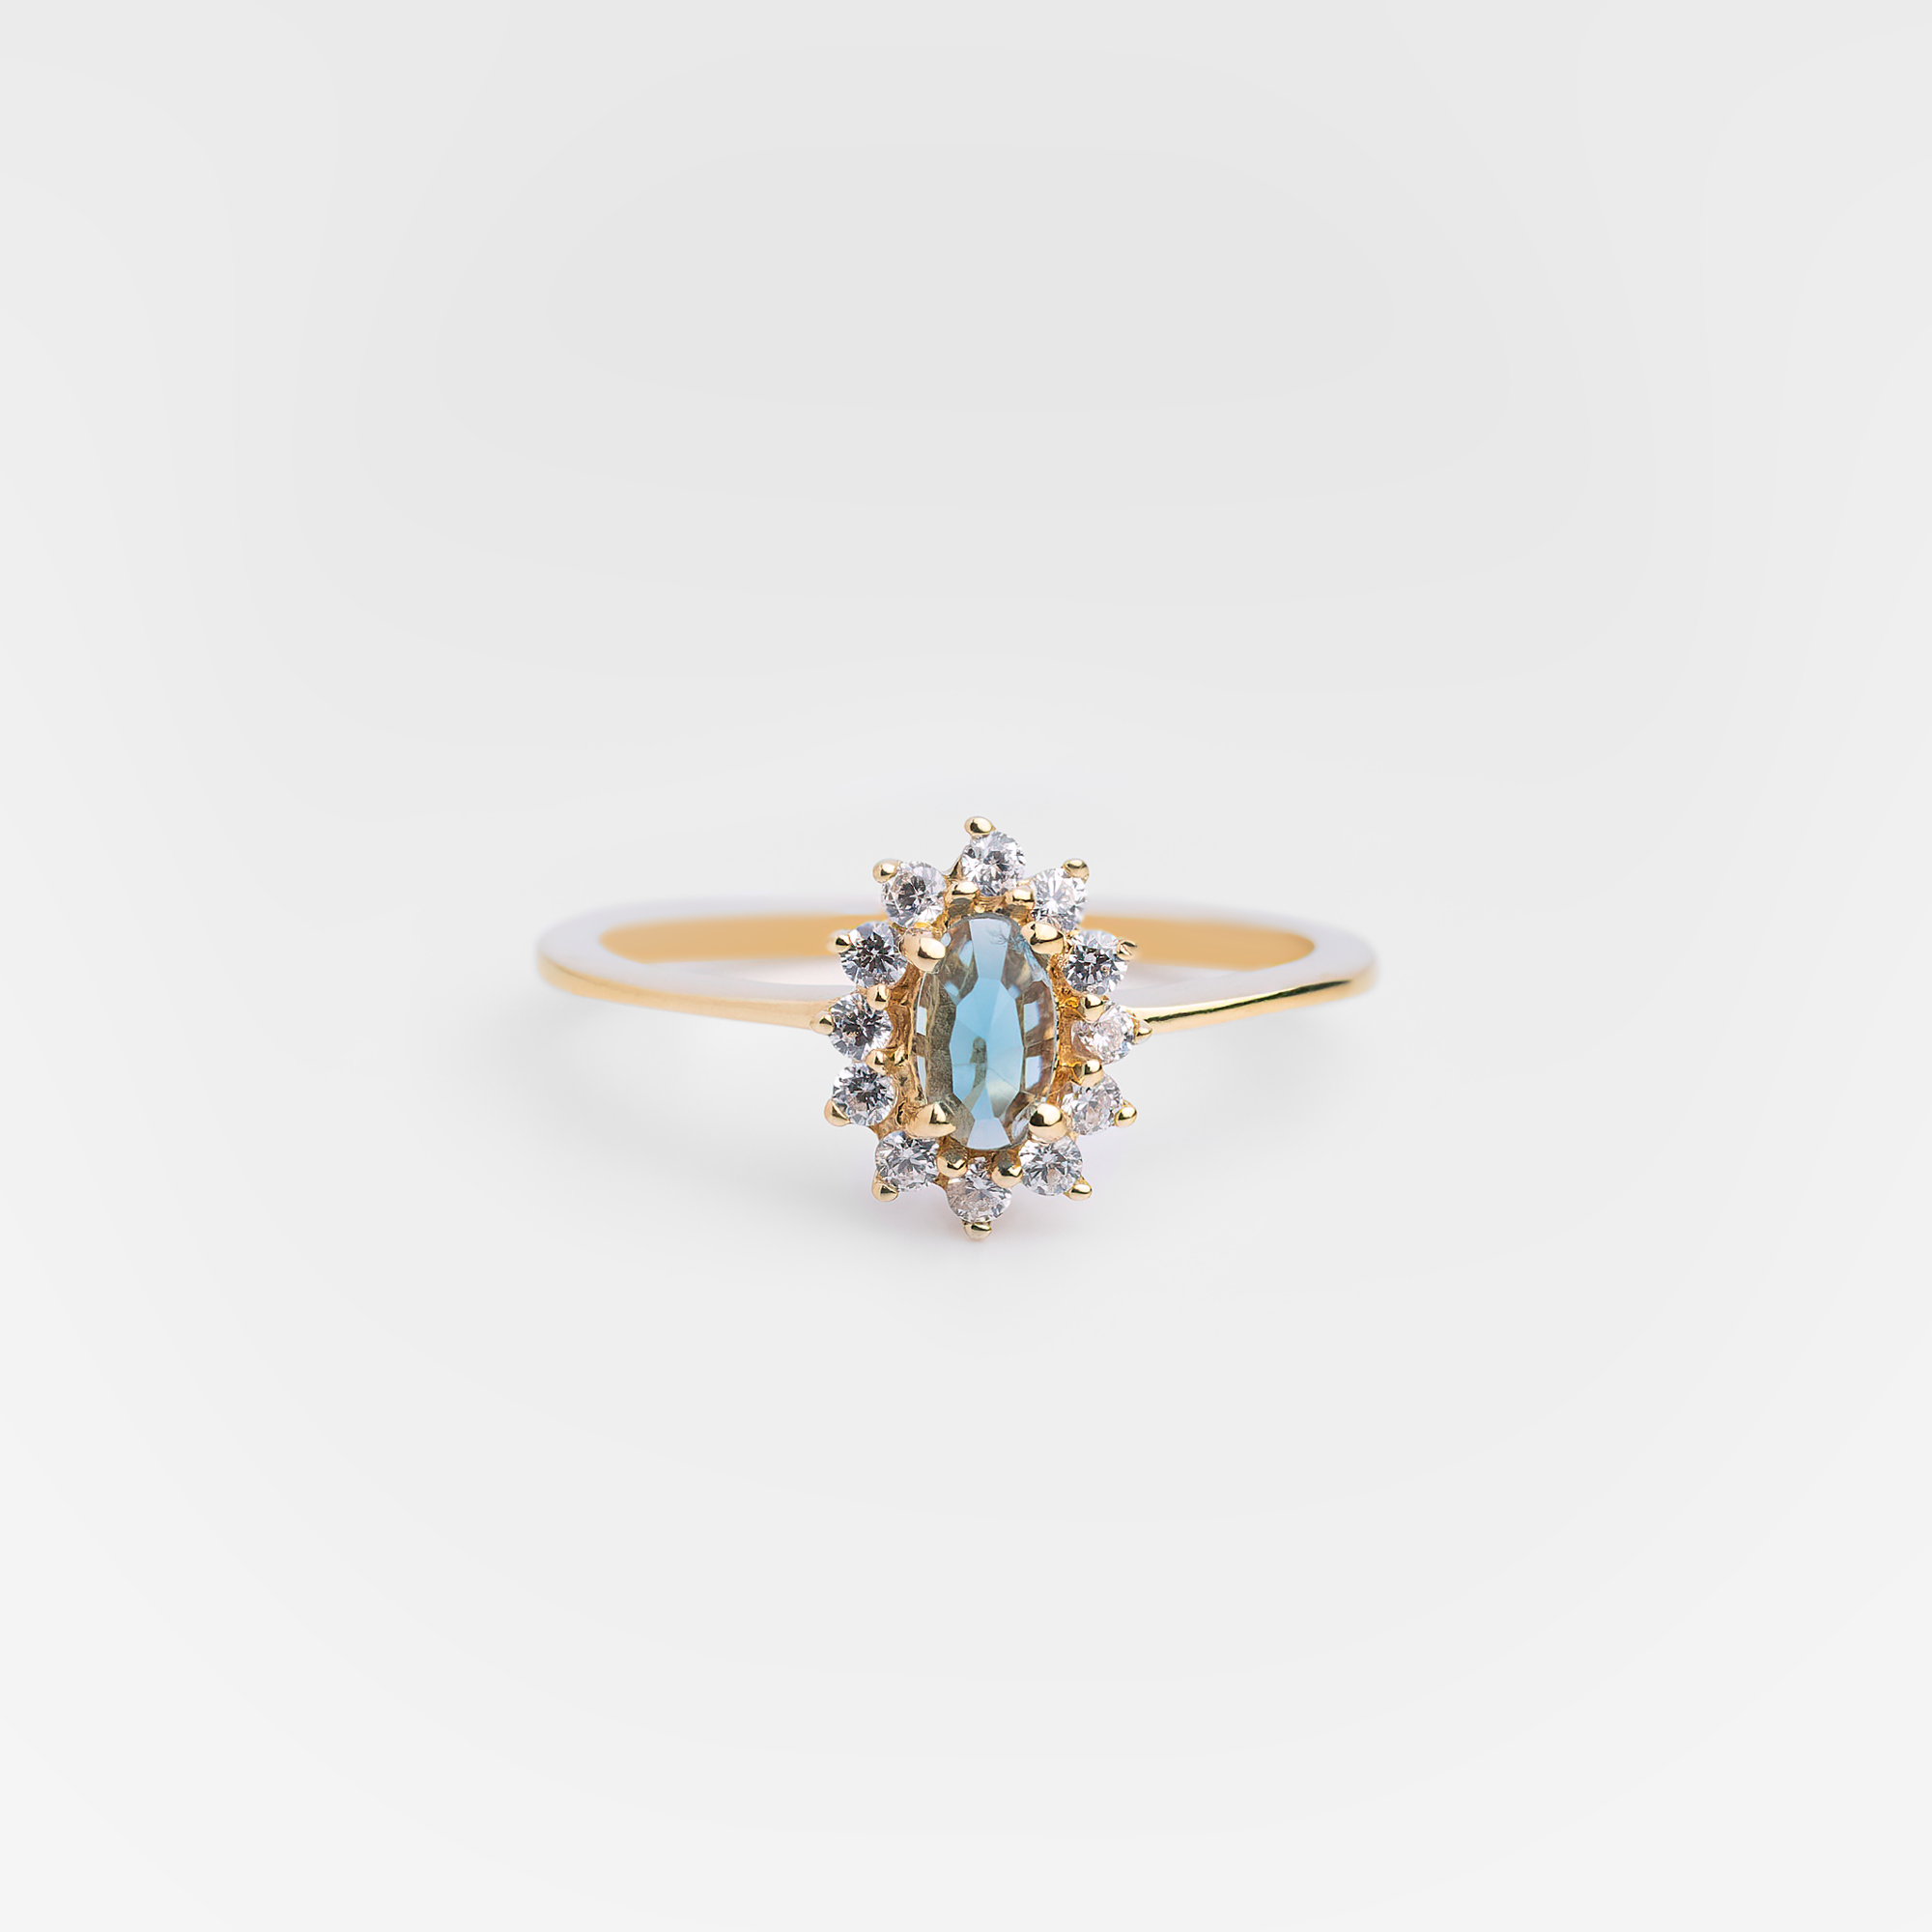 Luxembourg - 18K Gold Vermeil Blue Topaz Ring - Zafeer